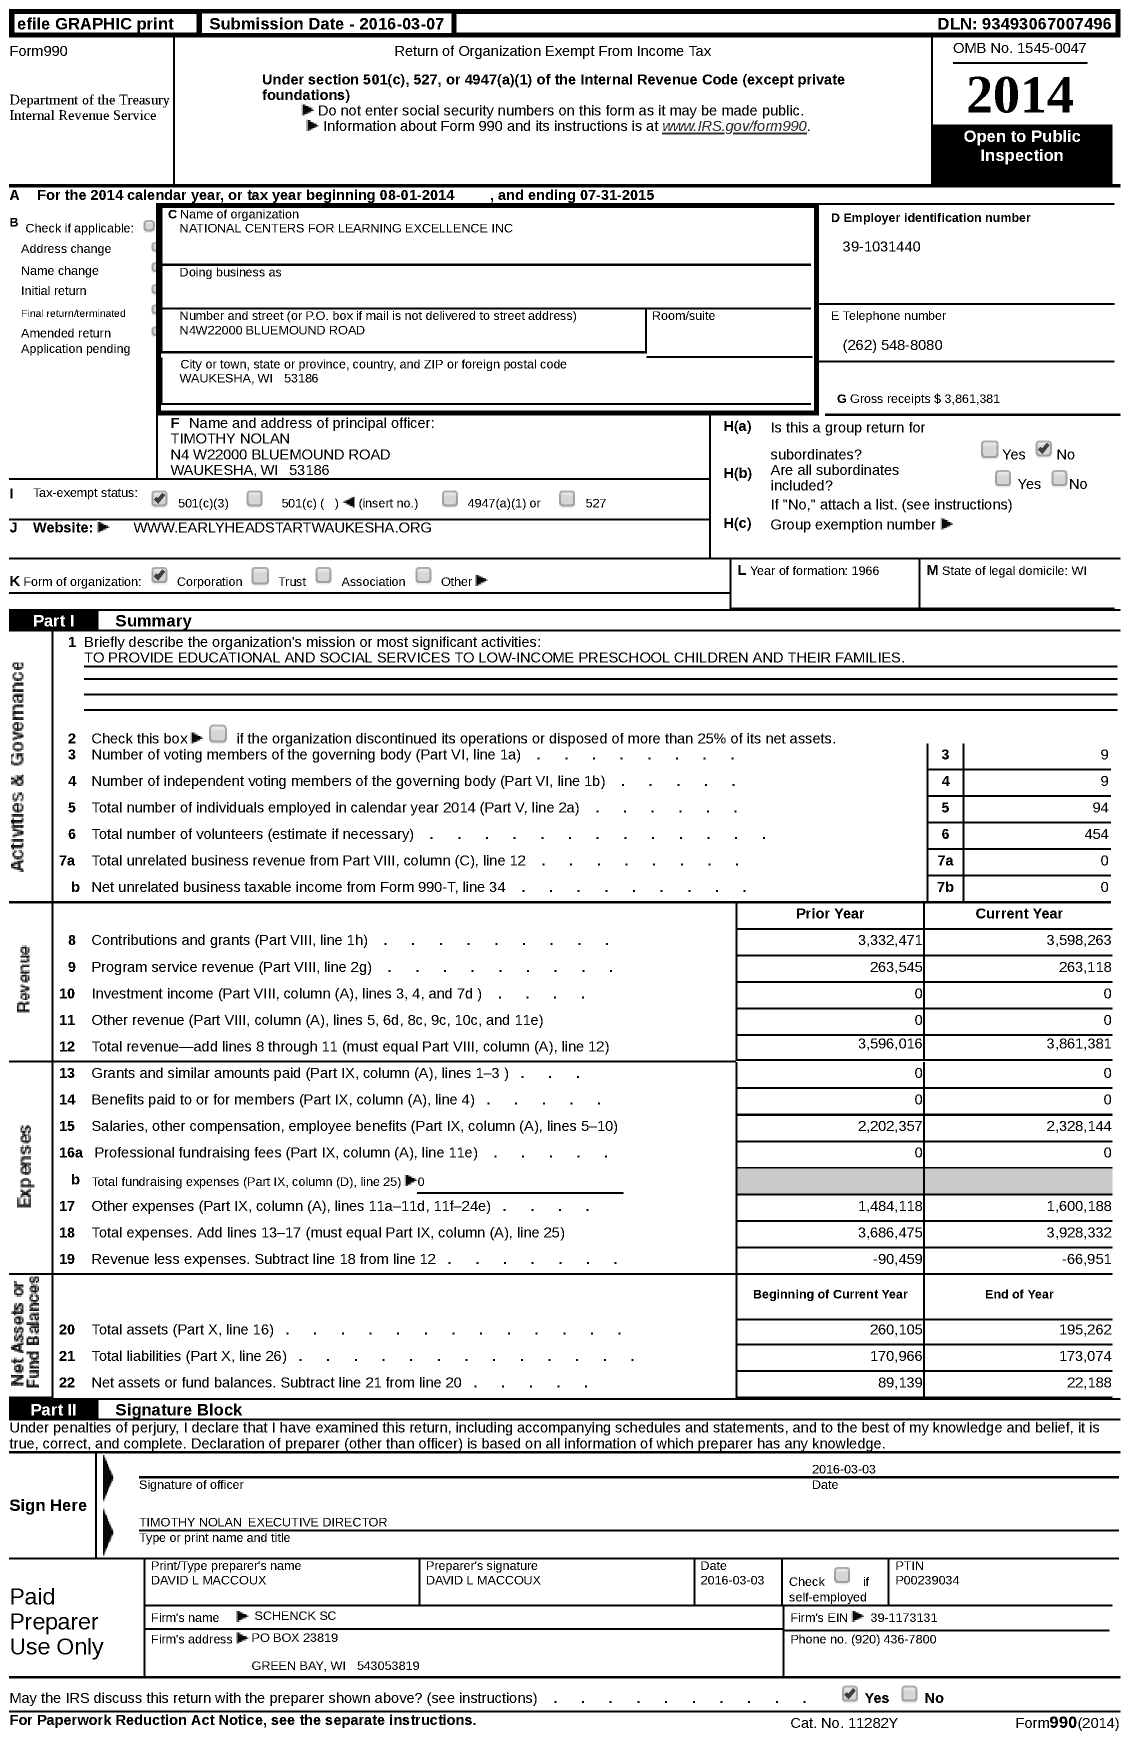 Image of first page of 2014 Form 990 for National Centers for Learning Excellence